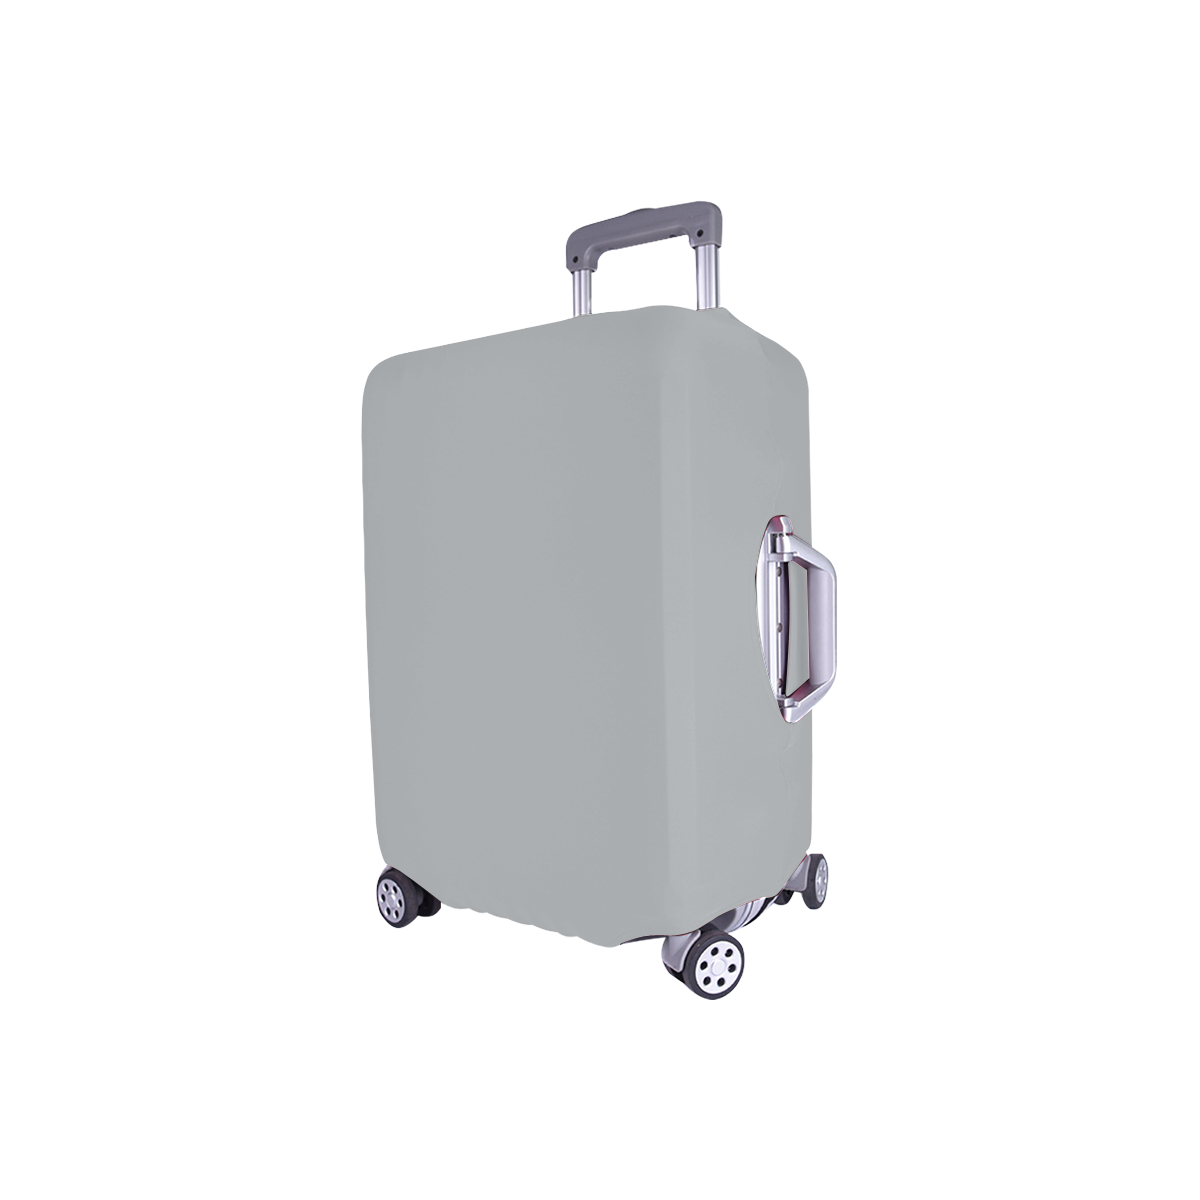 Harbor Mist Luggage Cover/Small 18"-21"